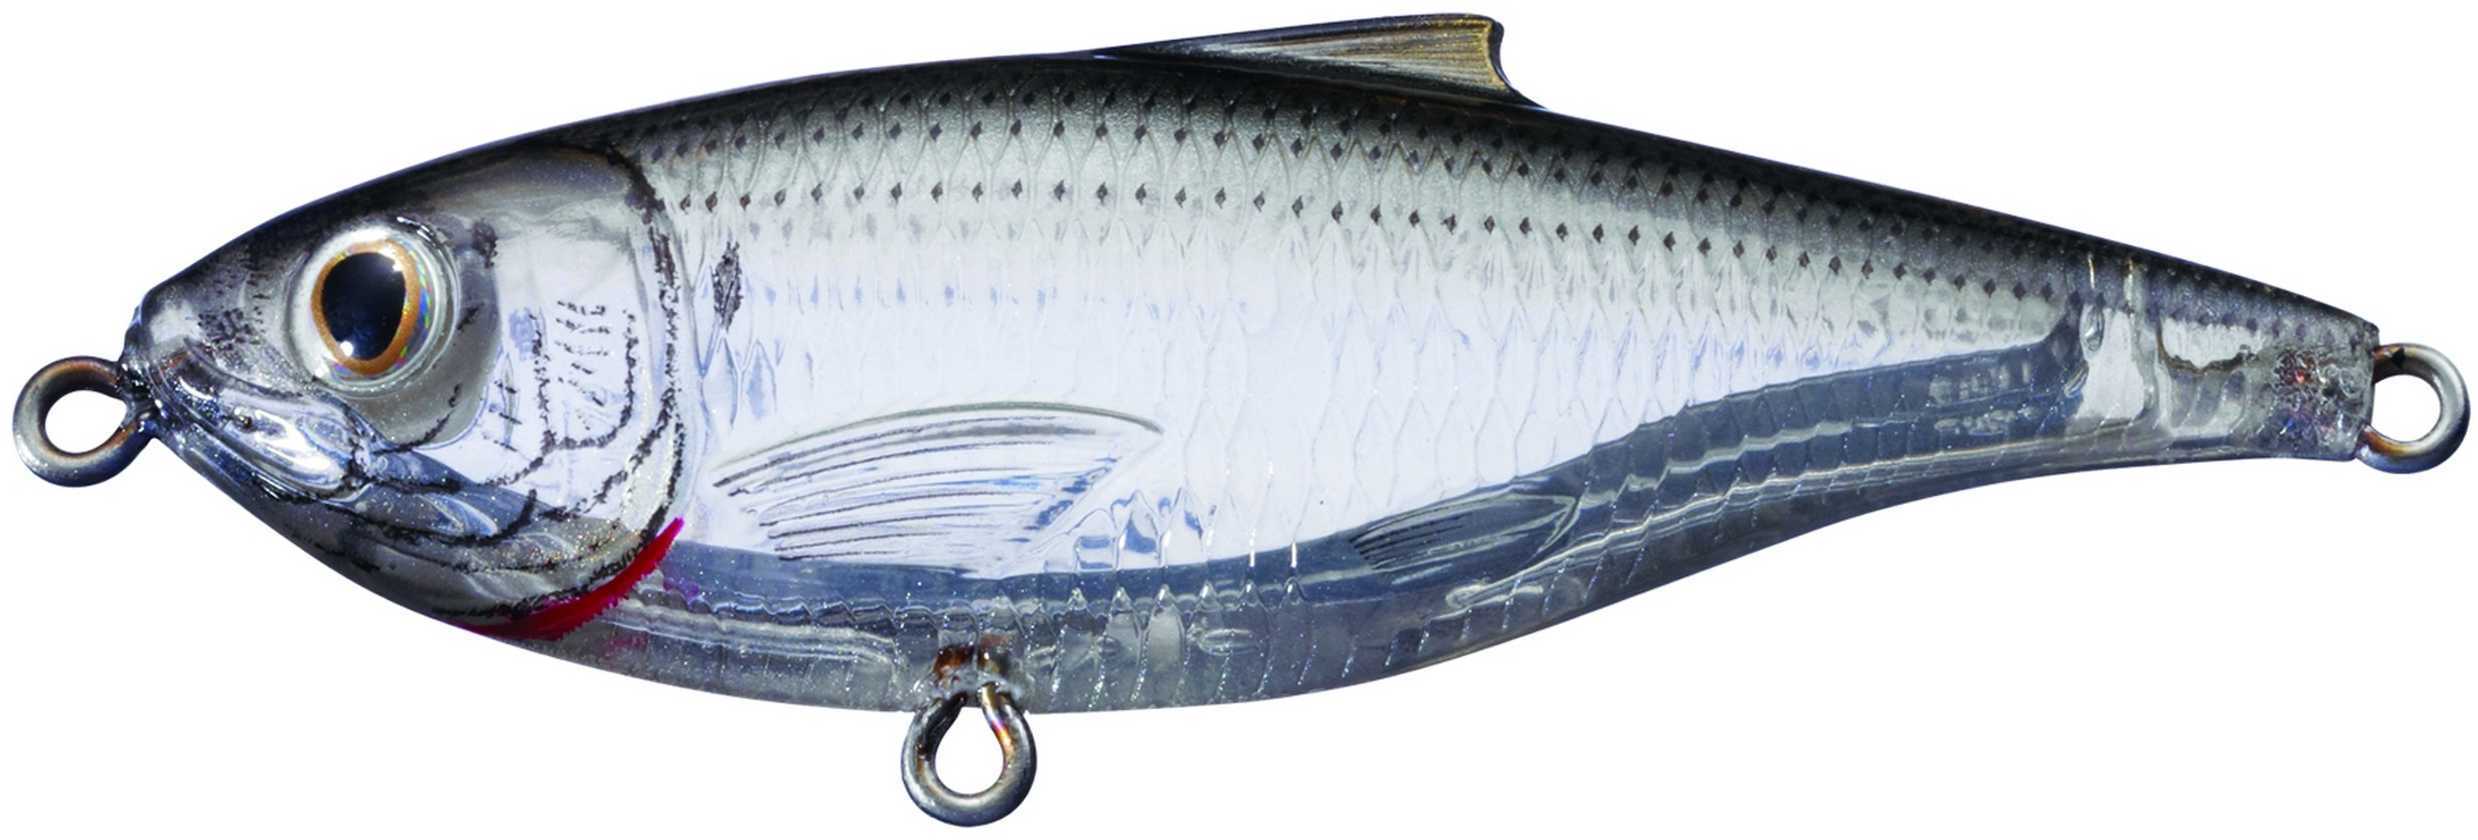 LIVETARGET Lures / Koppers Fishing and Tackle Corp Scaled Sardine Twitchbait Ghost/Natural #6 Md: SST75S948